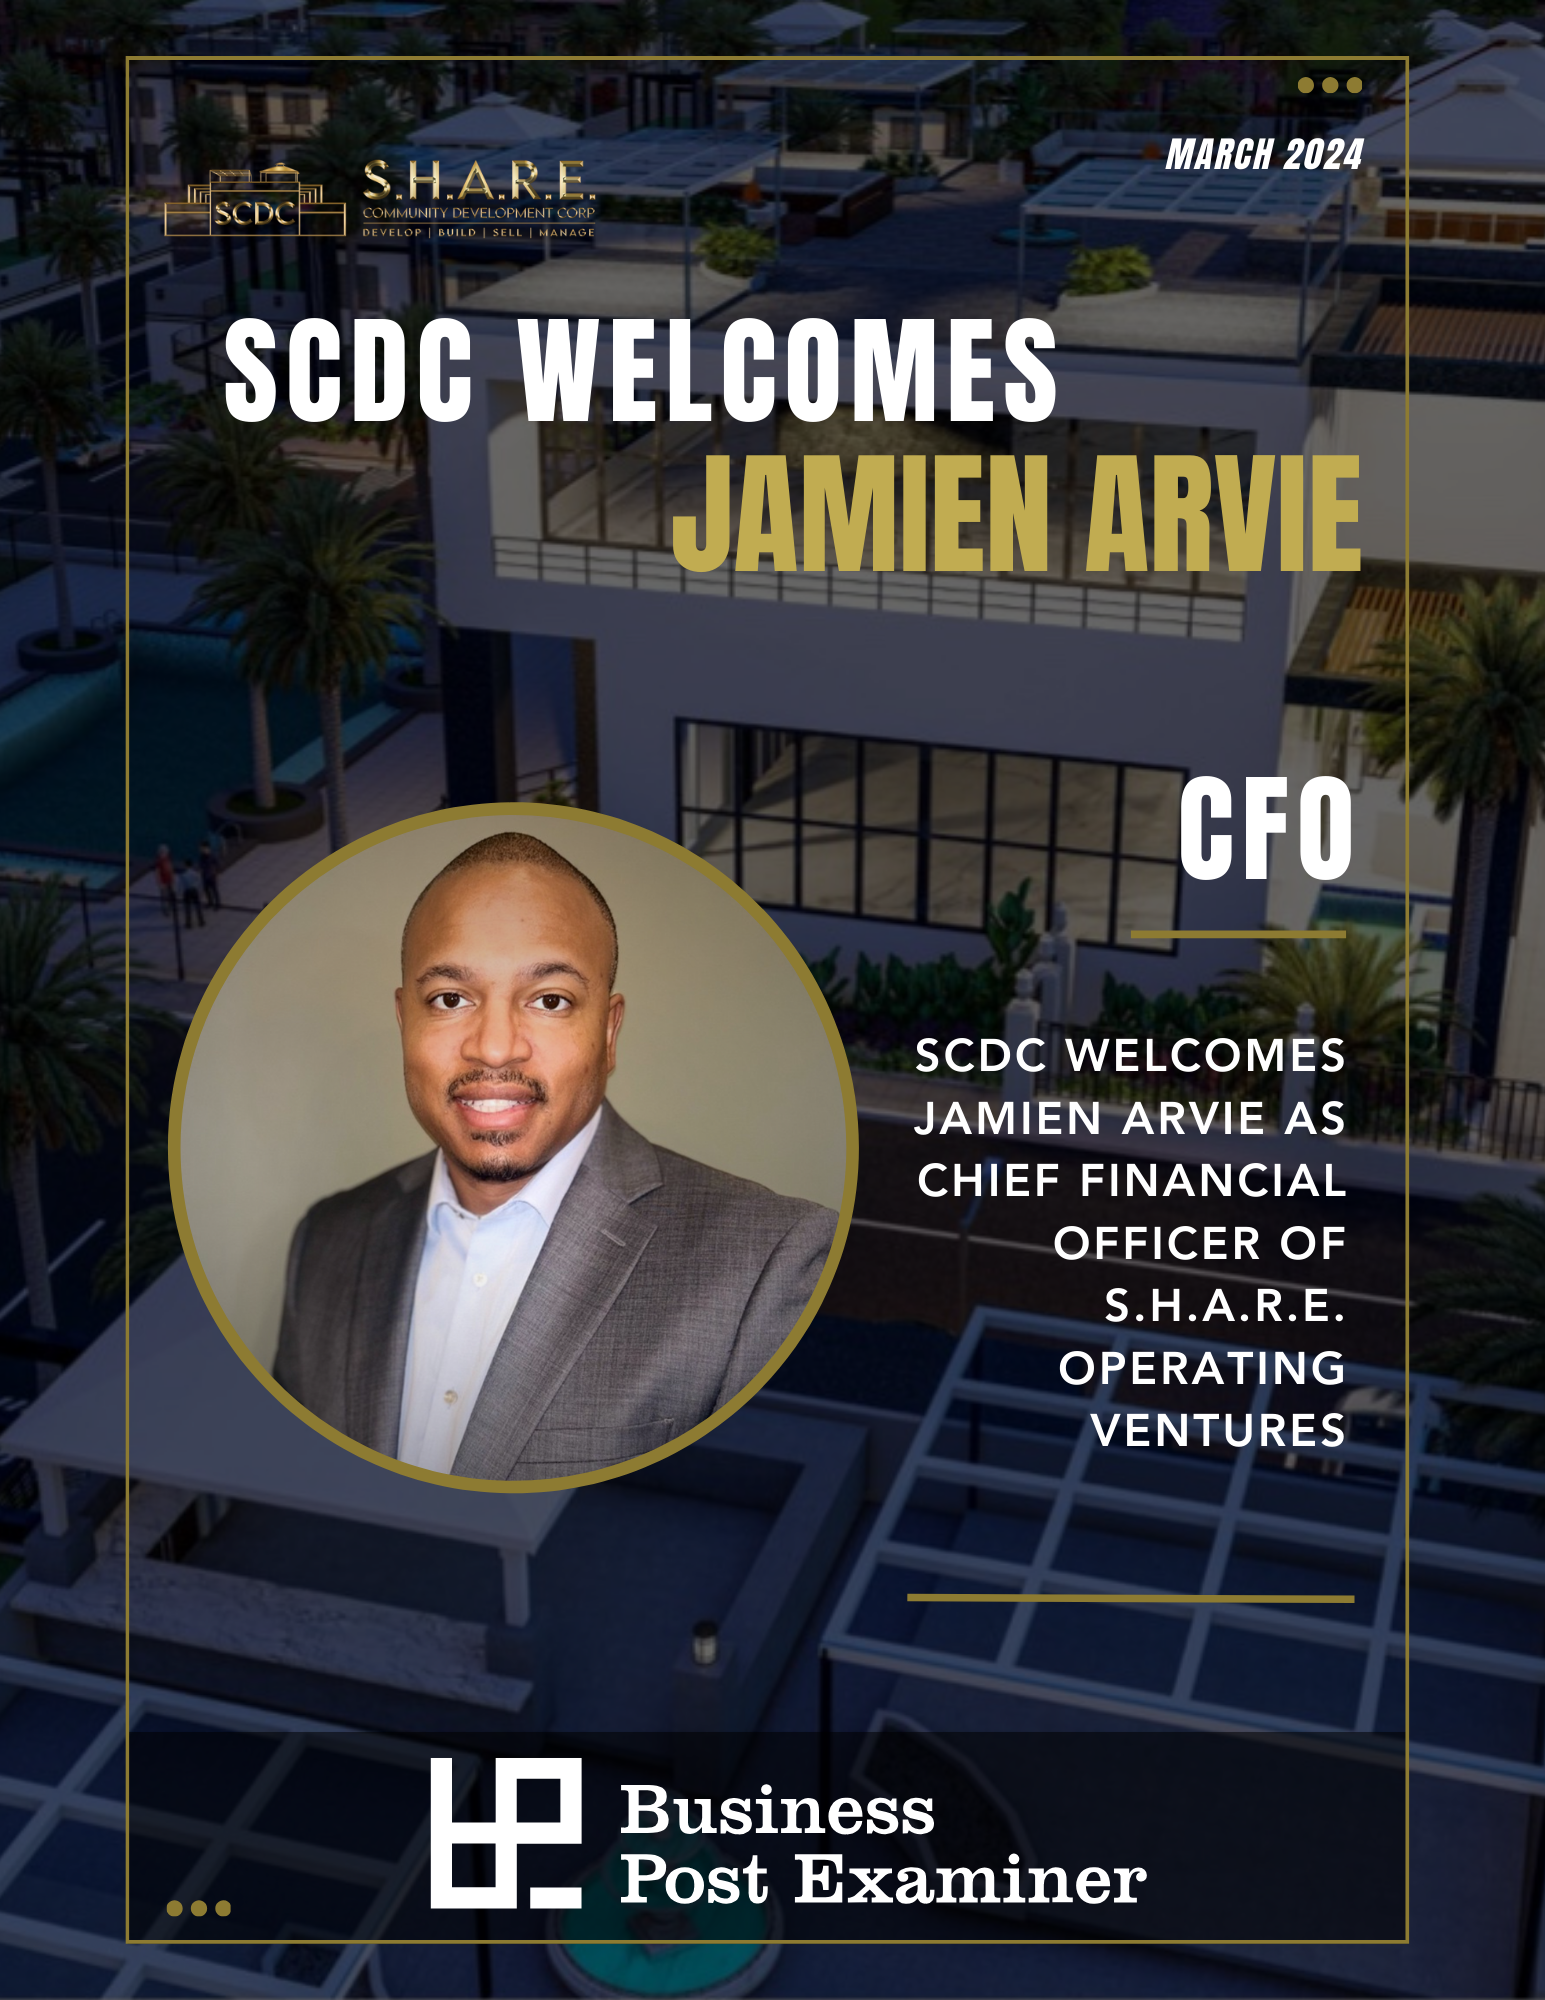 SCDC Appoints Jamien Arvie as CFO of S.H.A.R.E. Operating Ventures, Signifying a Strategic Financial Leadership Role